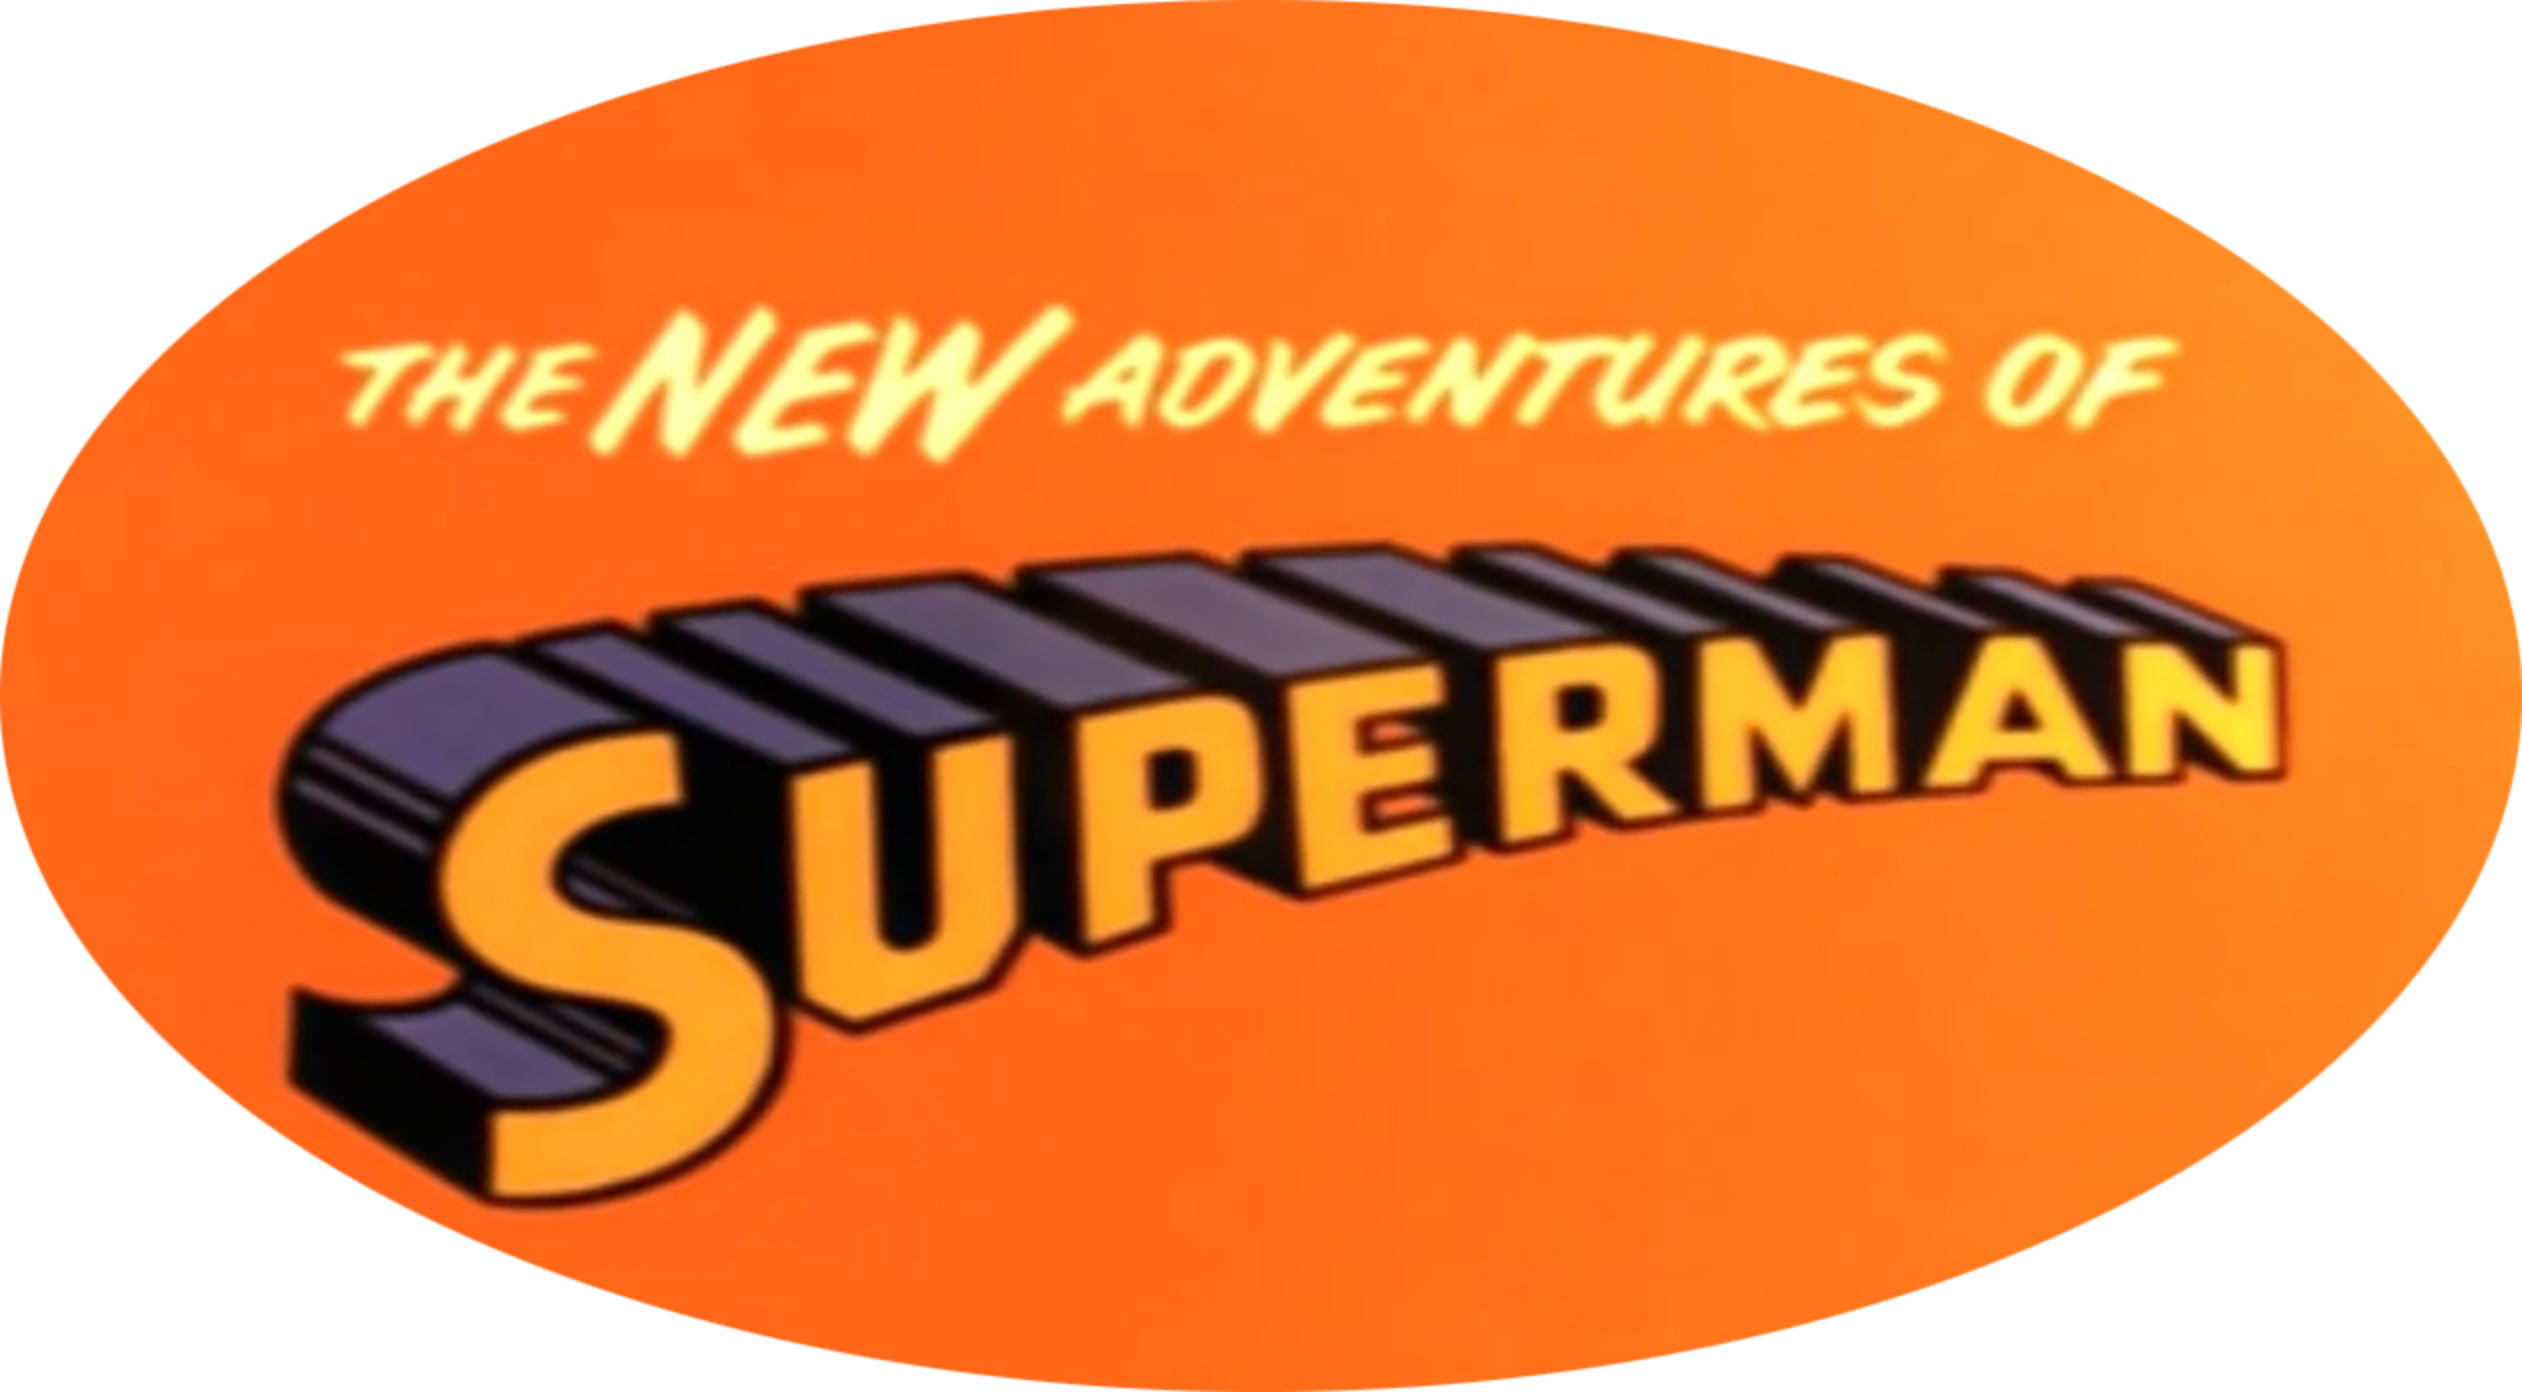 The New Adventures of Superman (2 DVDs Box Set)